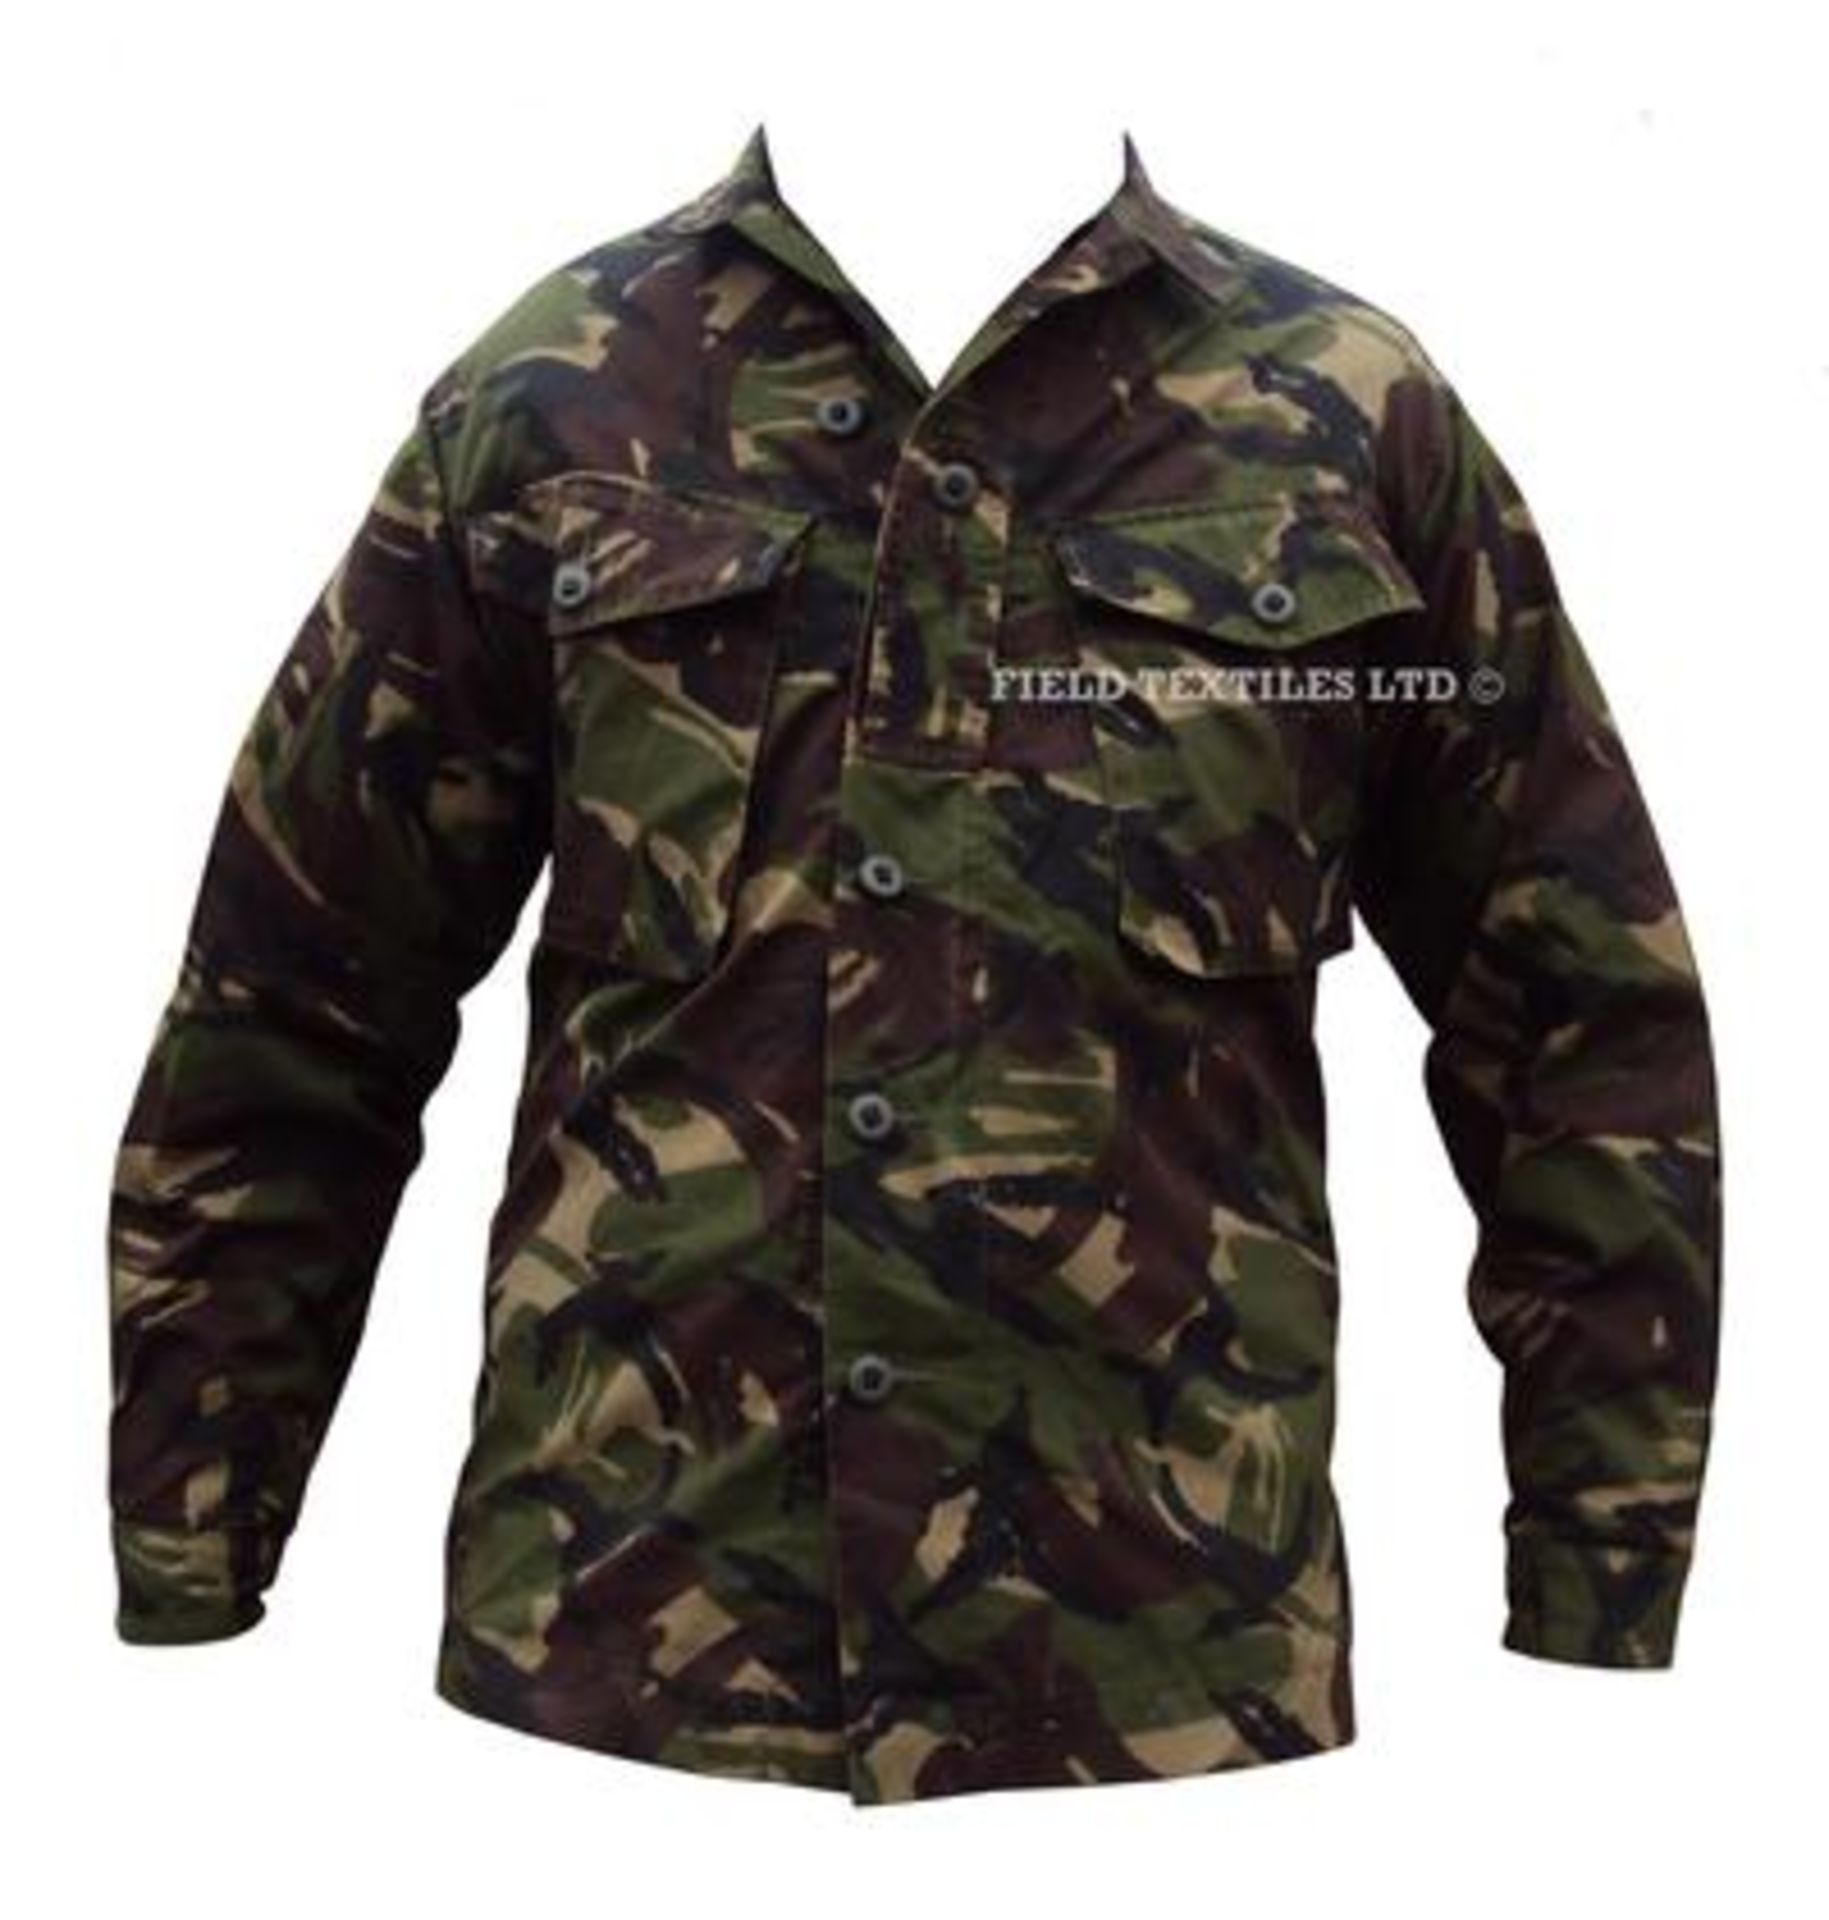 10 x Soldier 95 Shirts & 10 x MTP Jackets - Mix of Sizes - Grade 1